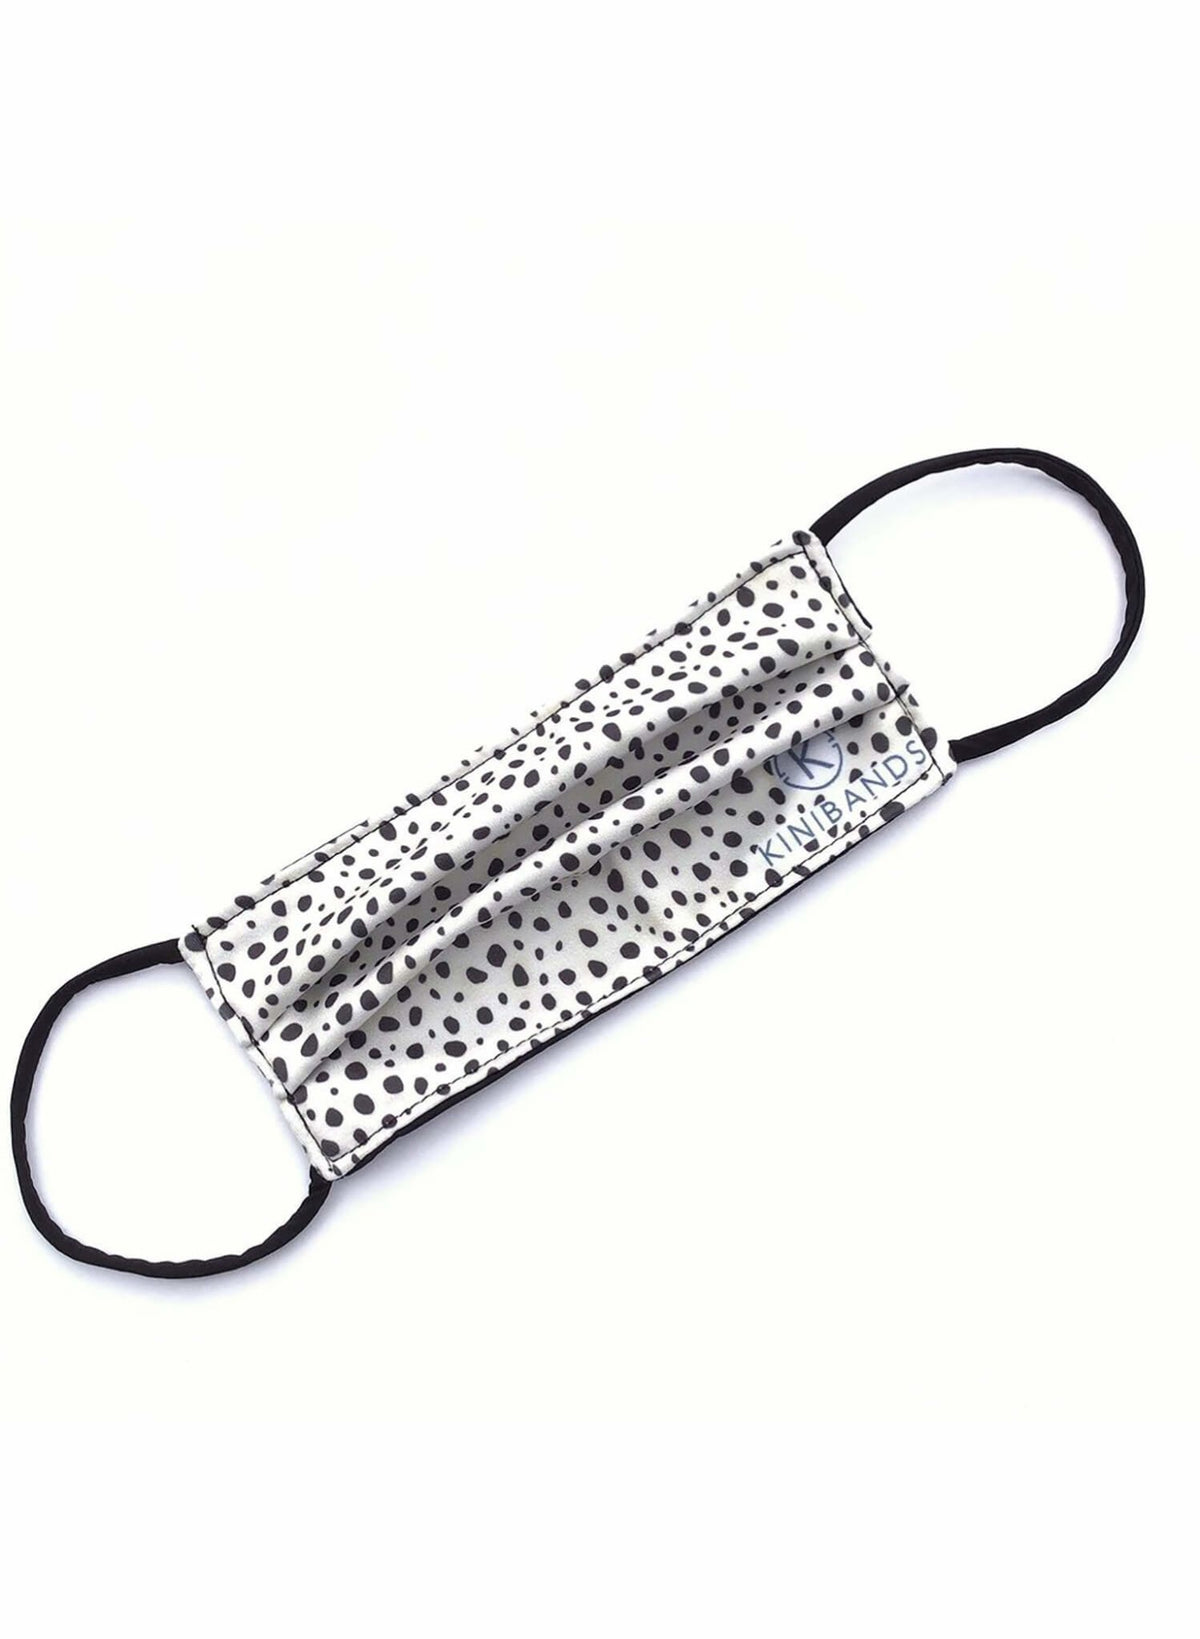 Kini Bands Face Mask - Speckled